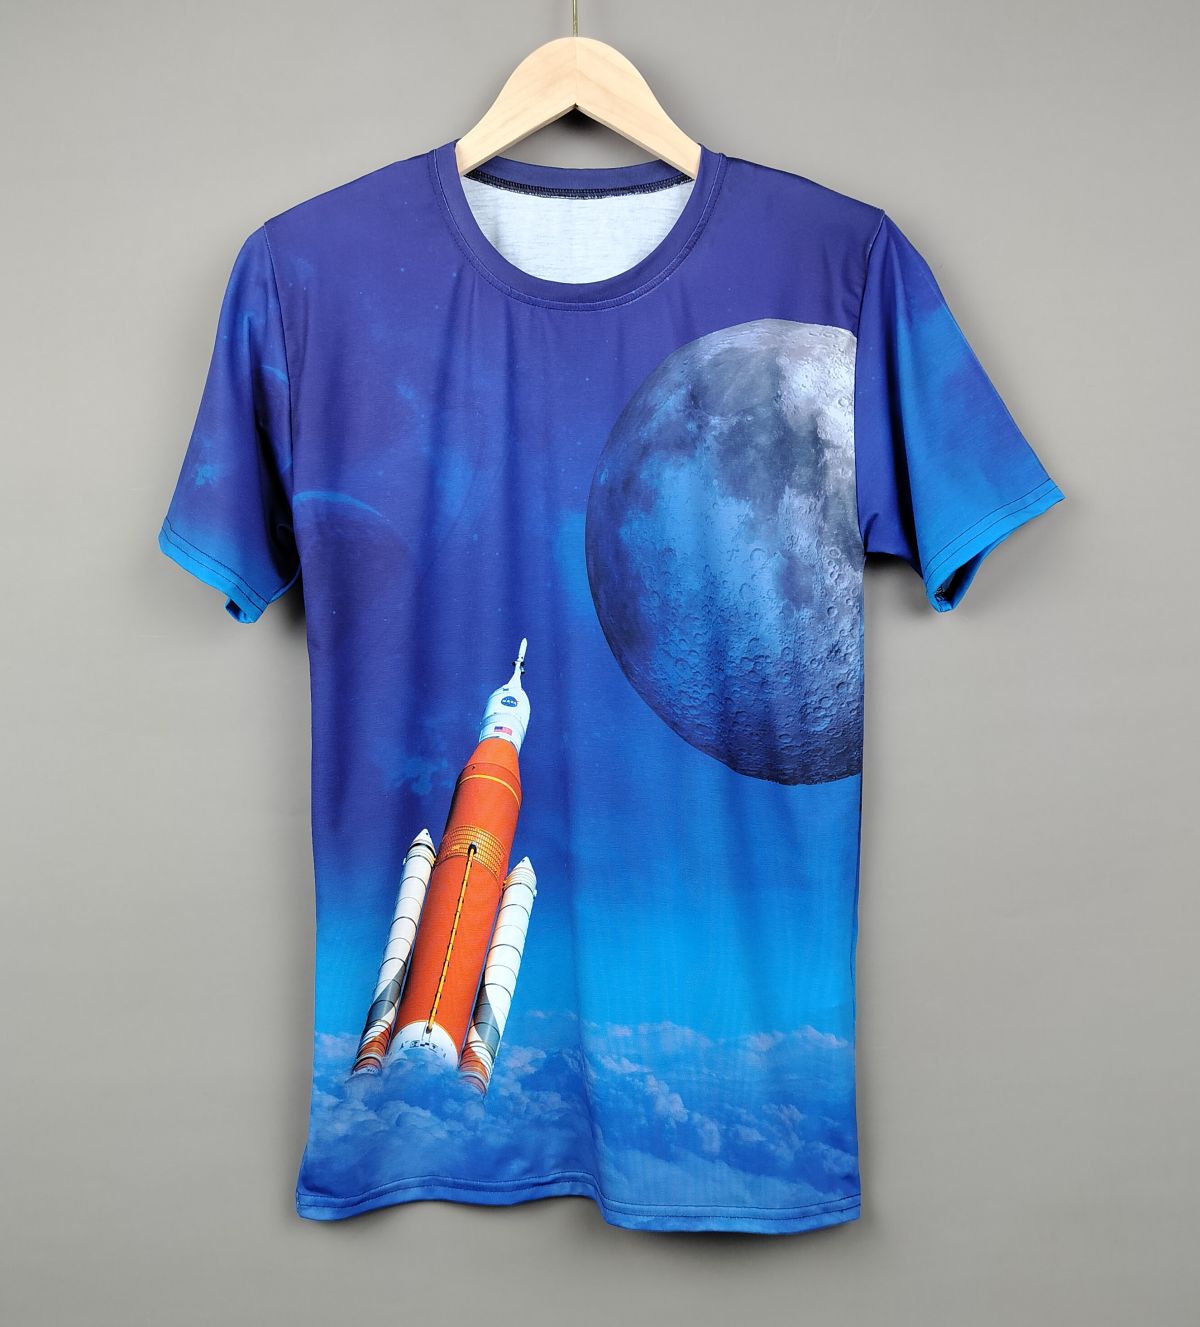 ARTEMIS SLS Rocket to the moon adult unisex t-shirt - The Space Store